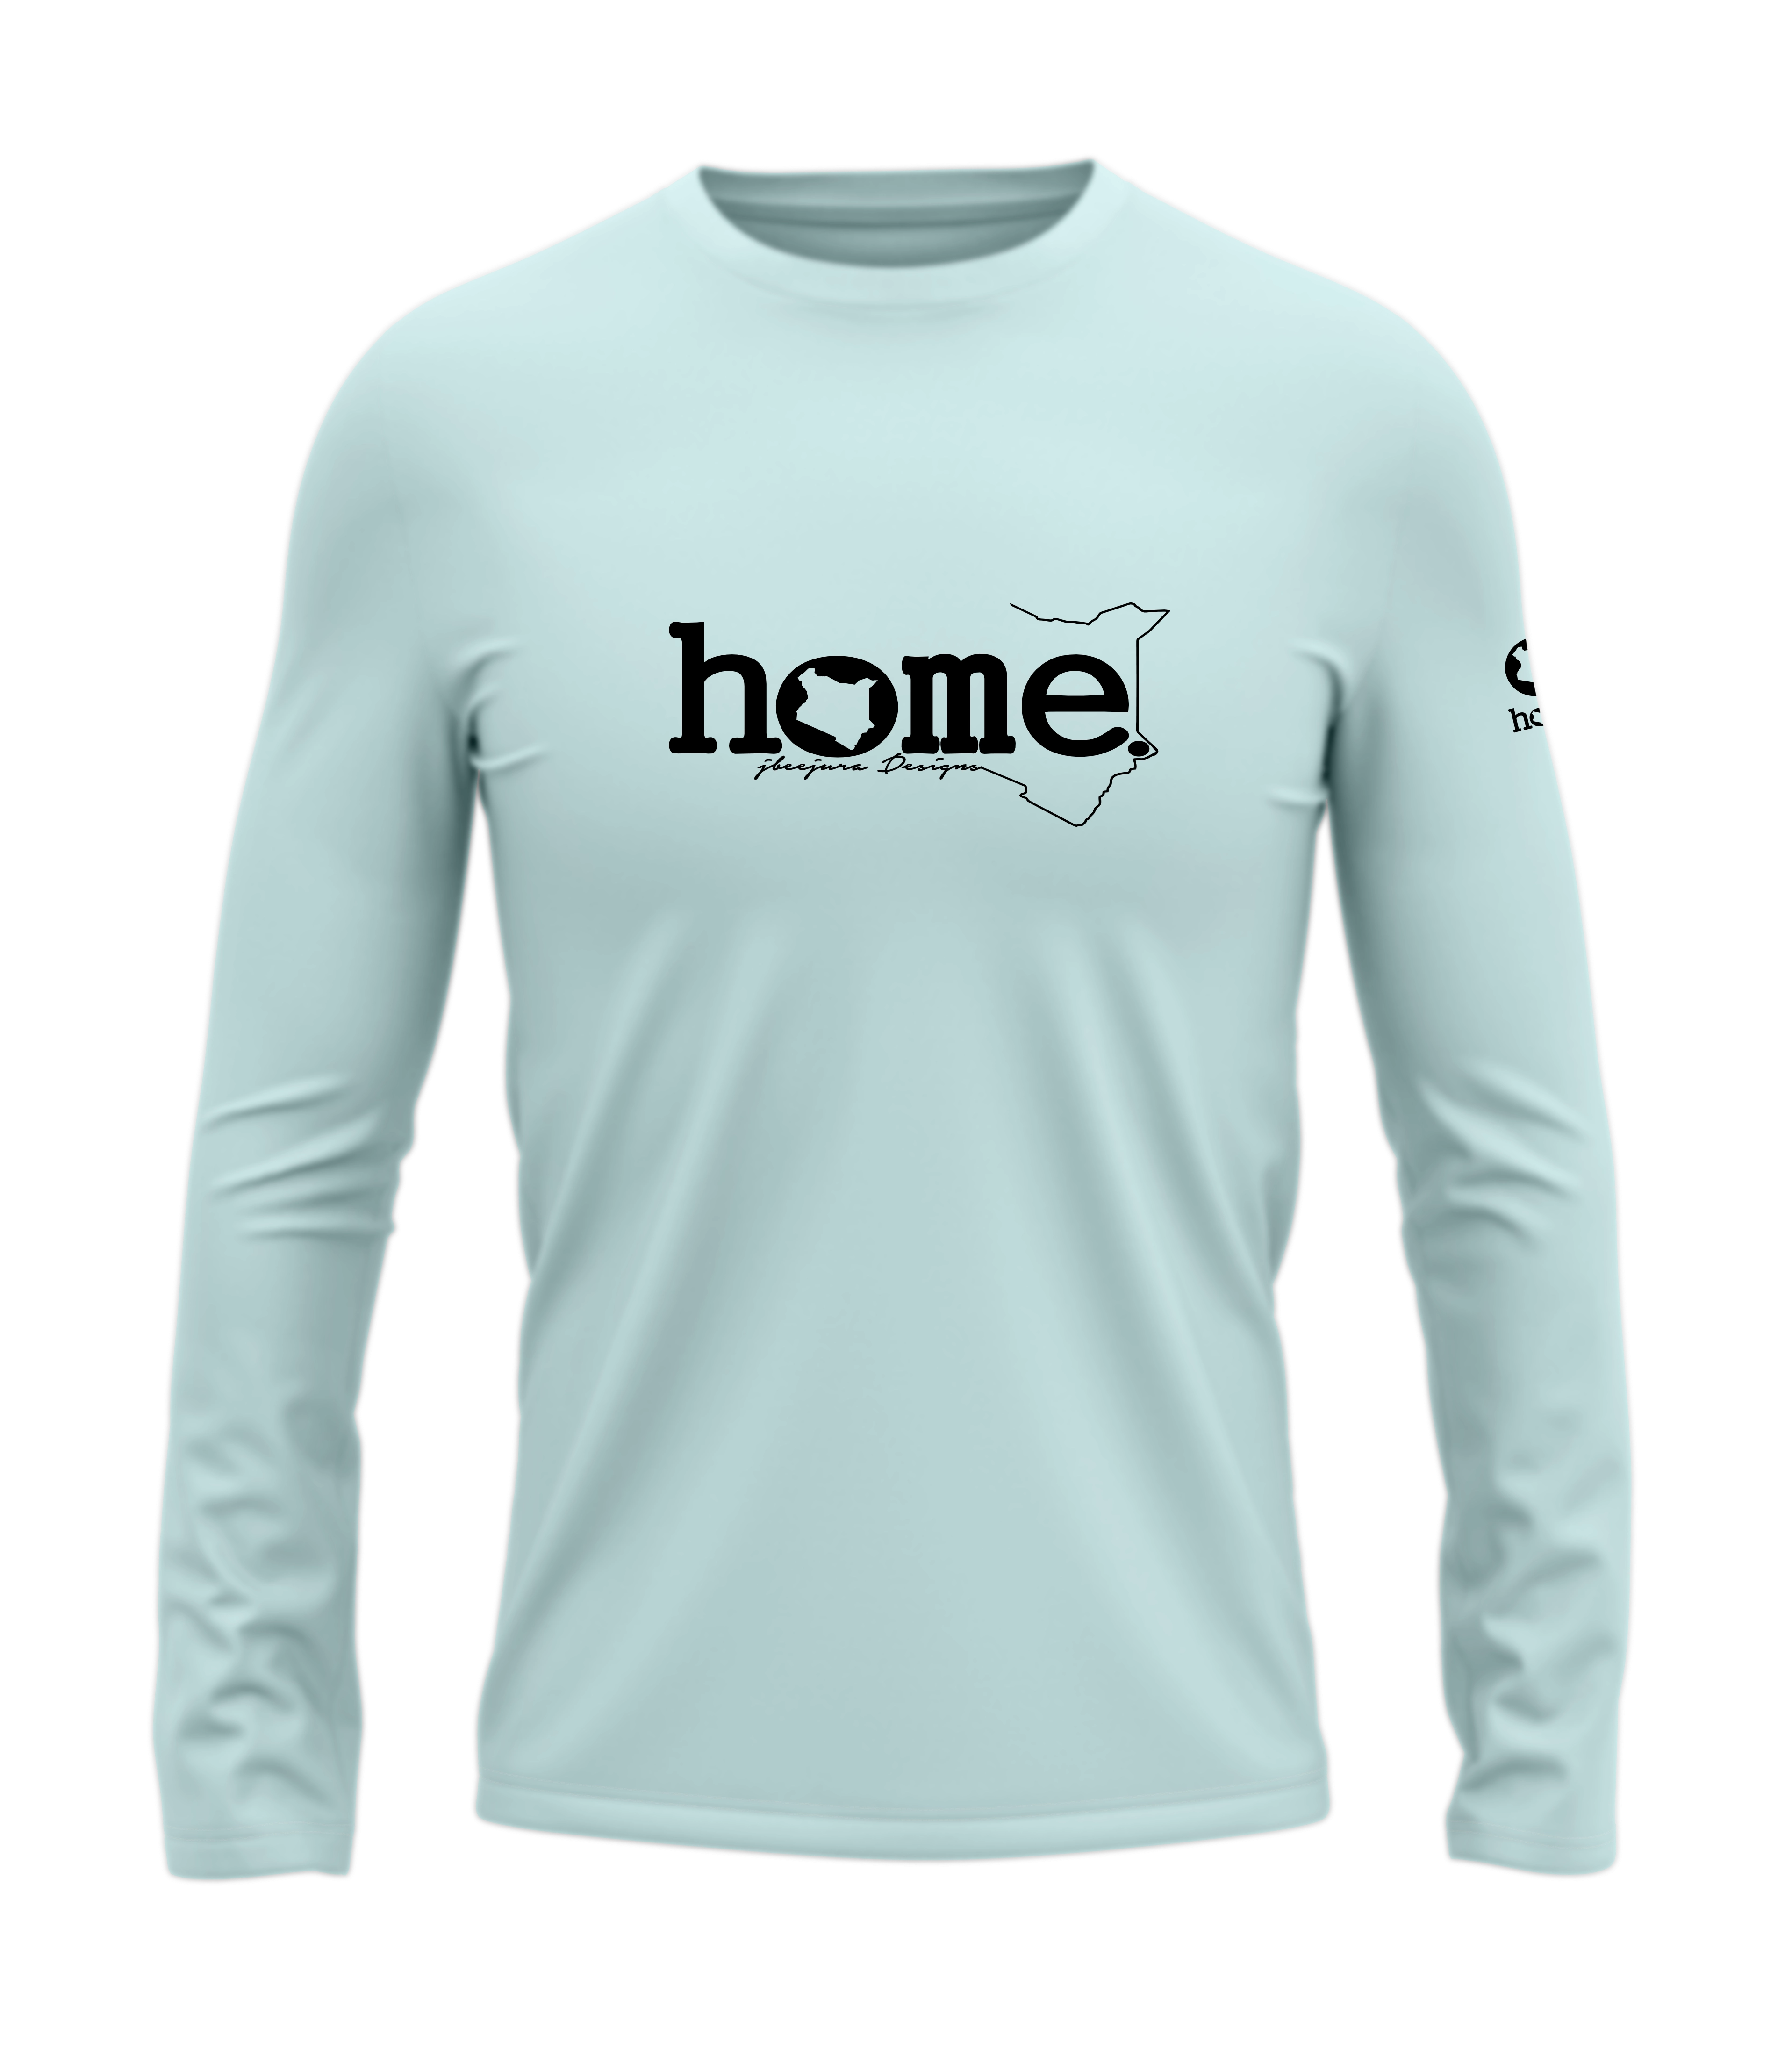 home_254 LONG-SLEEVED MISTY BLUE T-SHIRT WITH A BLACK CLASSIC WORDS  PRINT – COTTON PLUS FABRIC